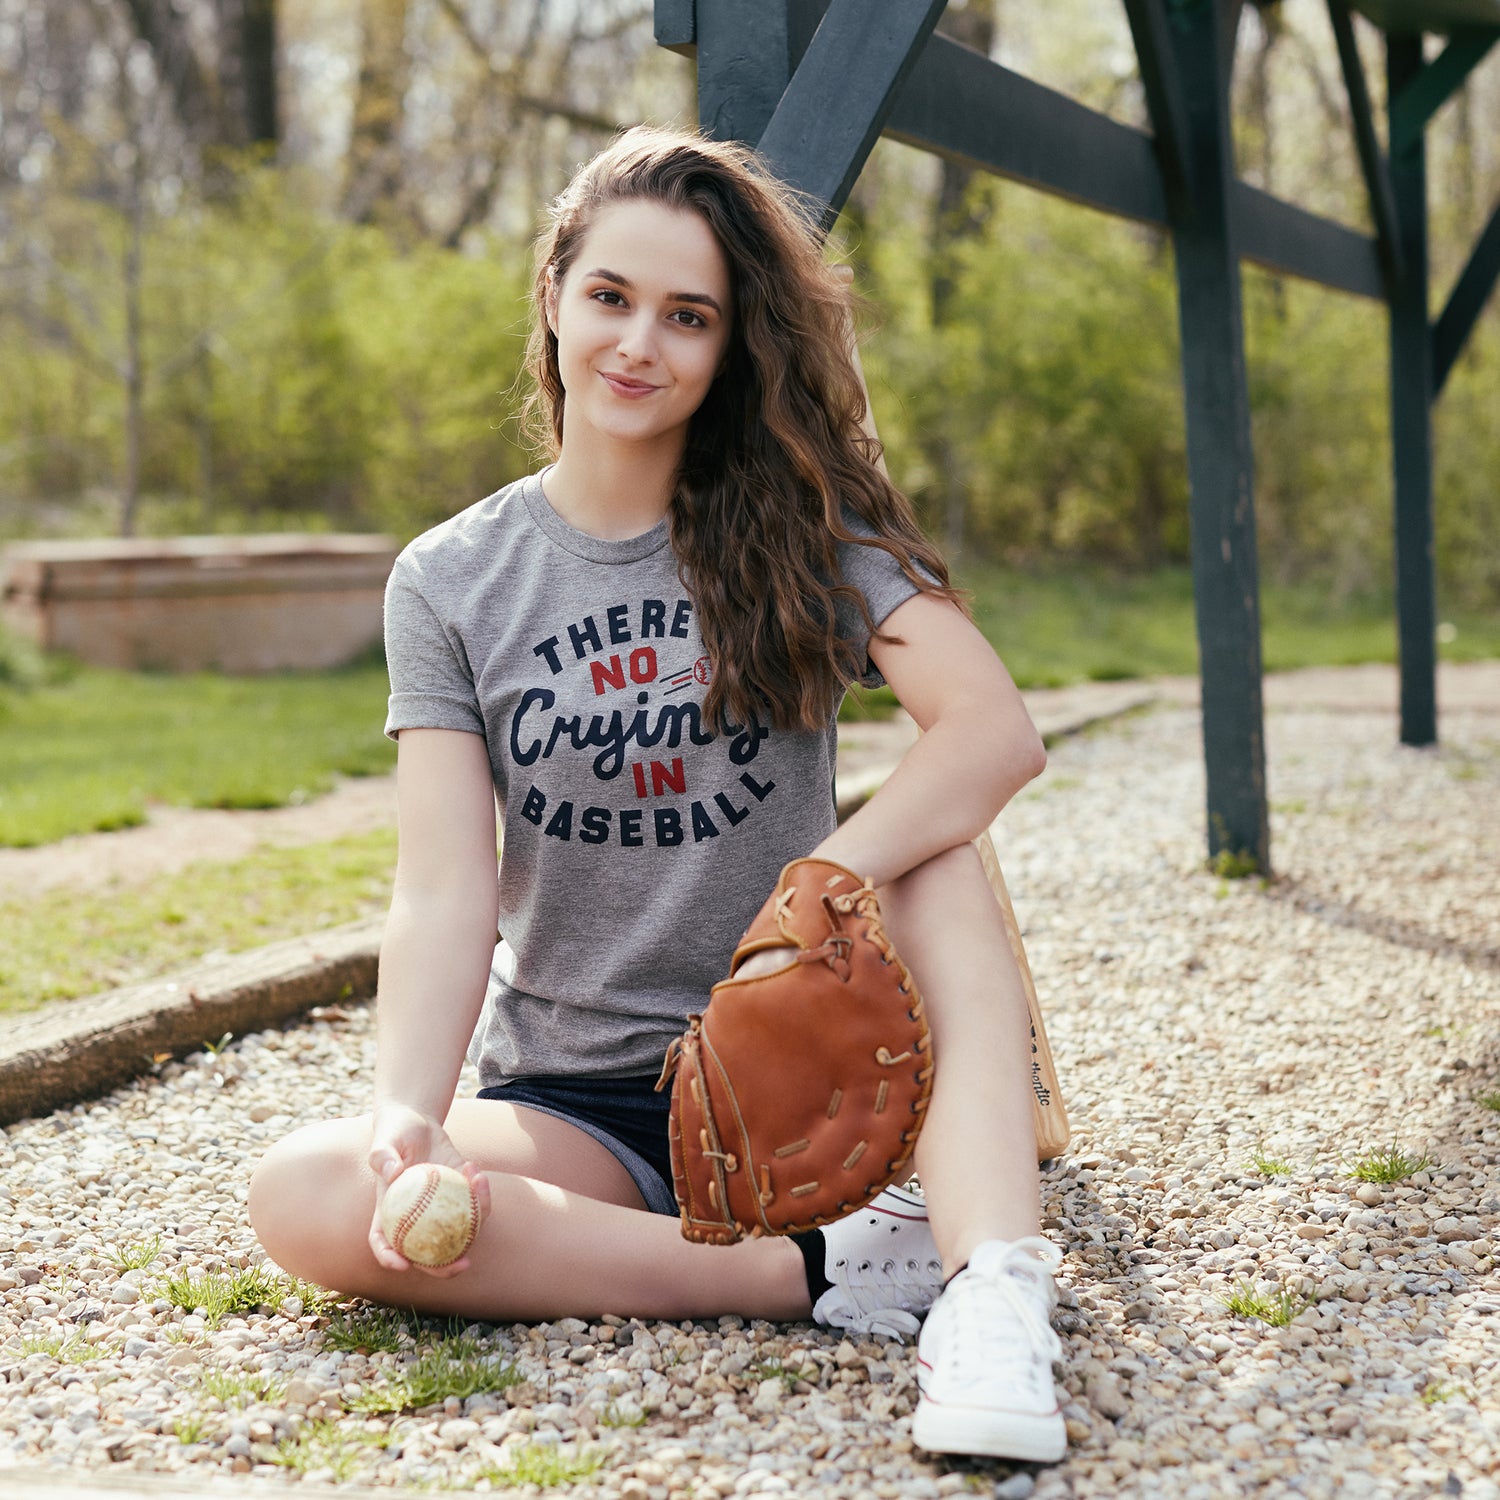 Boston Red Sox Let's Play Baseball Together Snoopy MLB Women's T-Shirt 